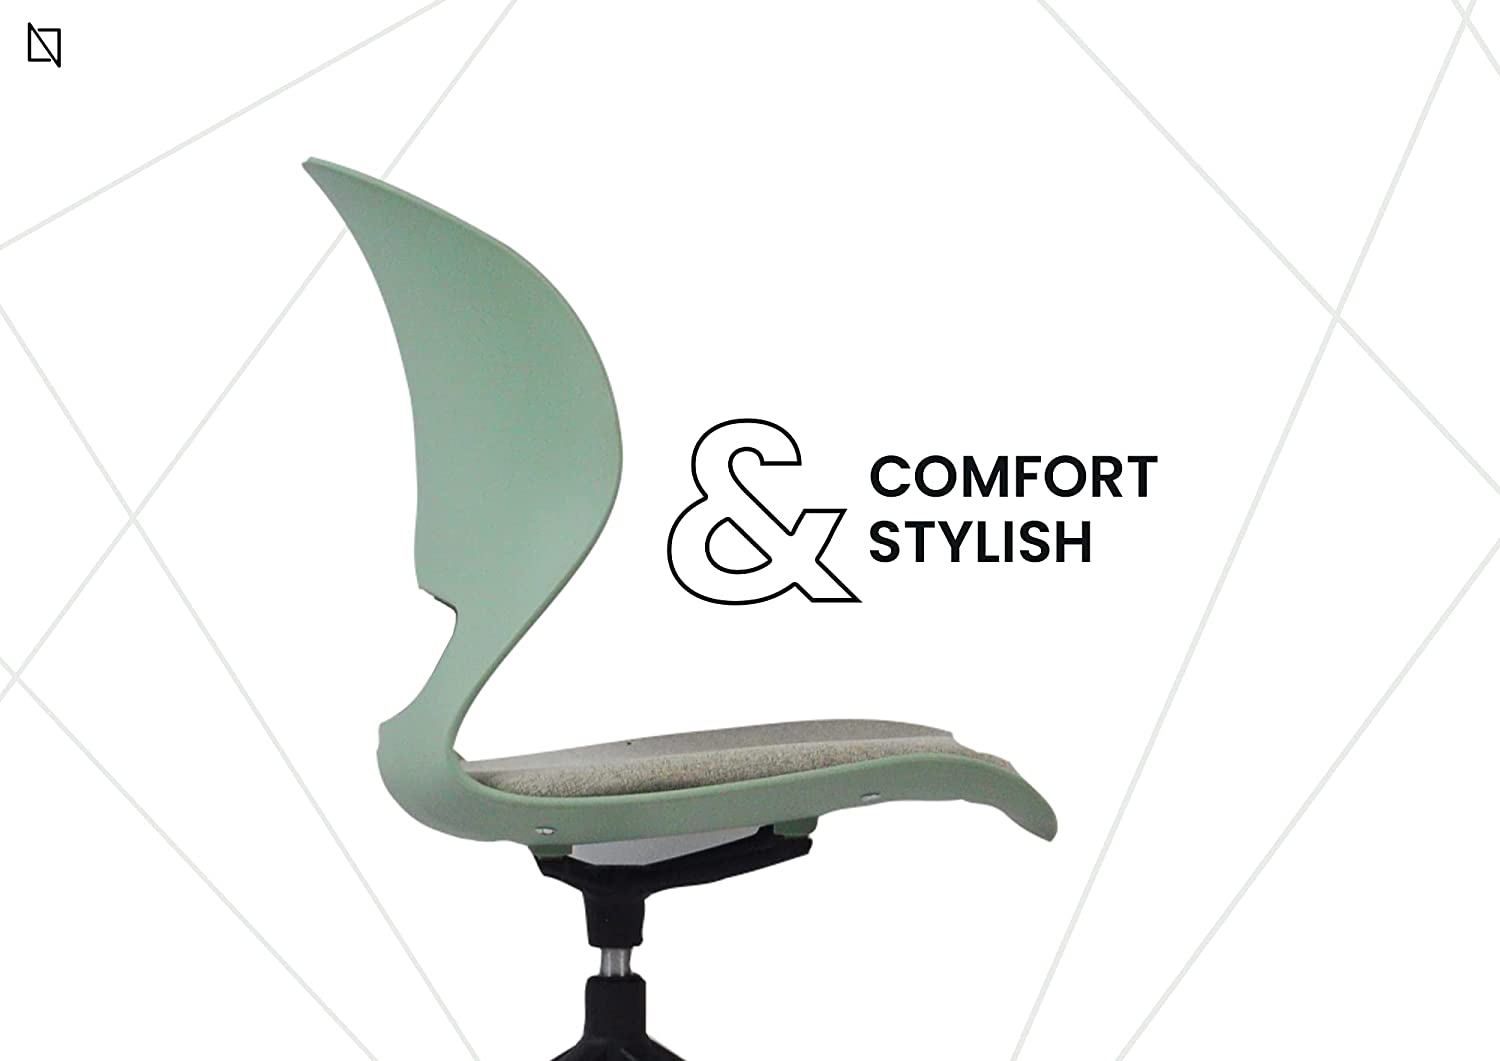 Comfort & Stylish VIS Chairs by Navodesk